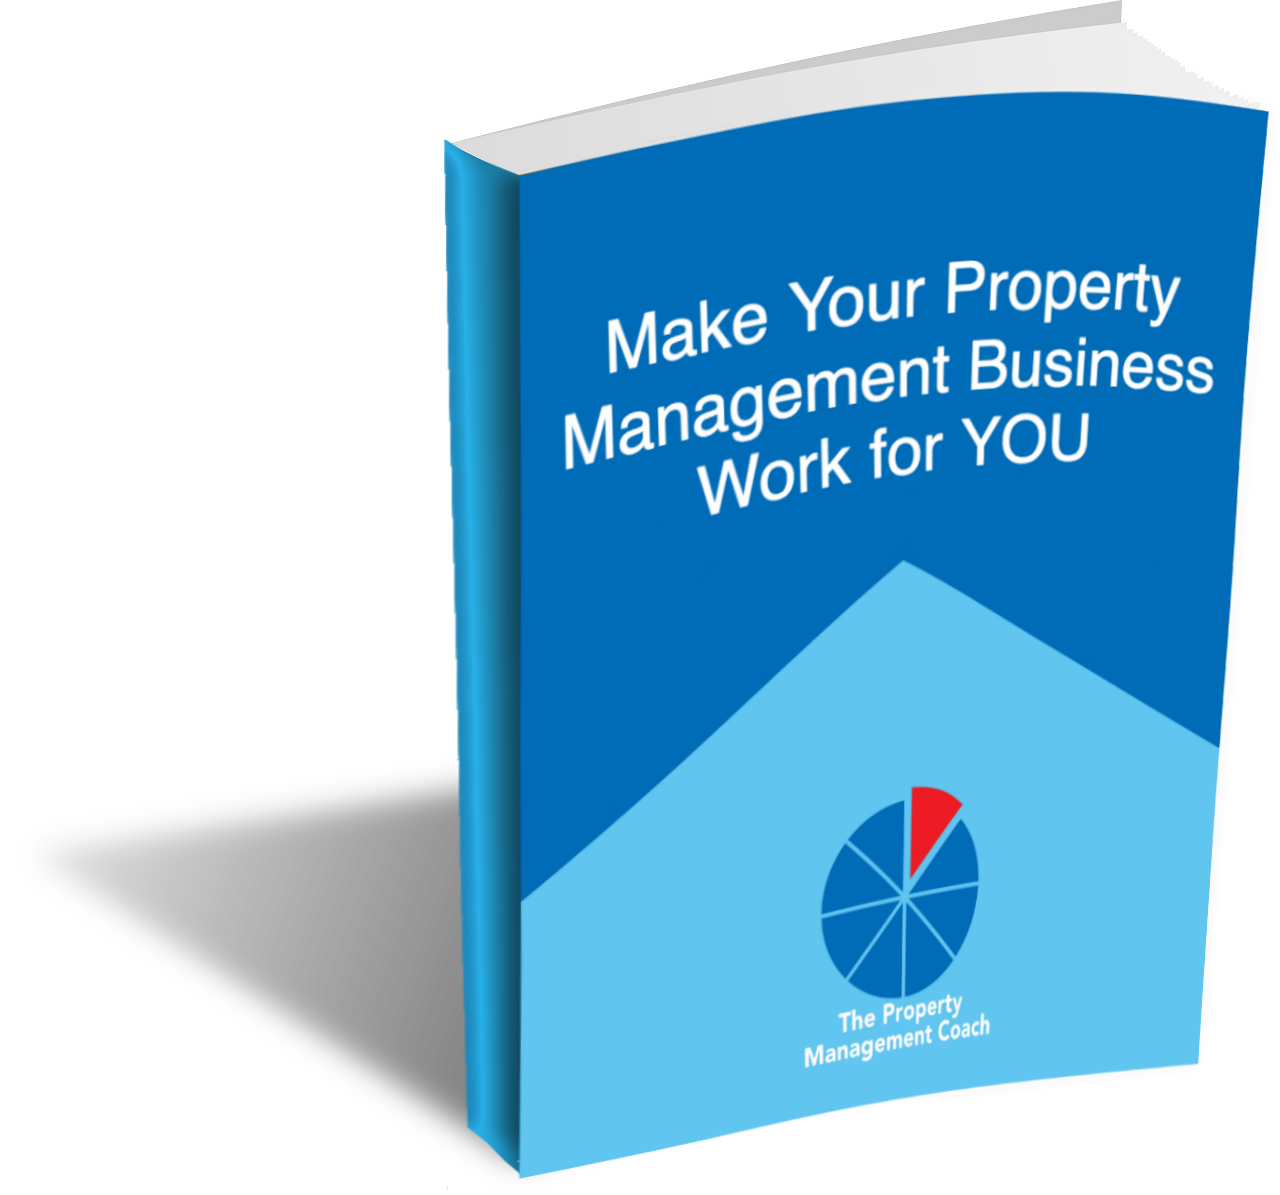 The PM Coach eBook Cover - Make Your Property Management Business Work (FINAL)